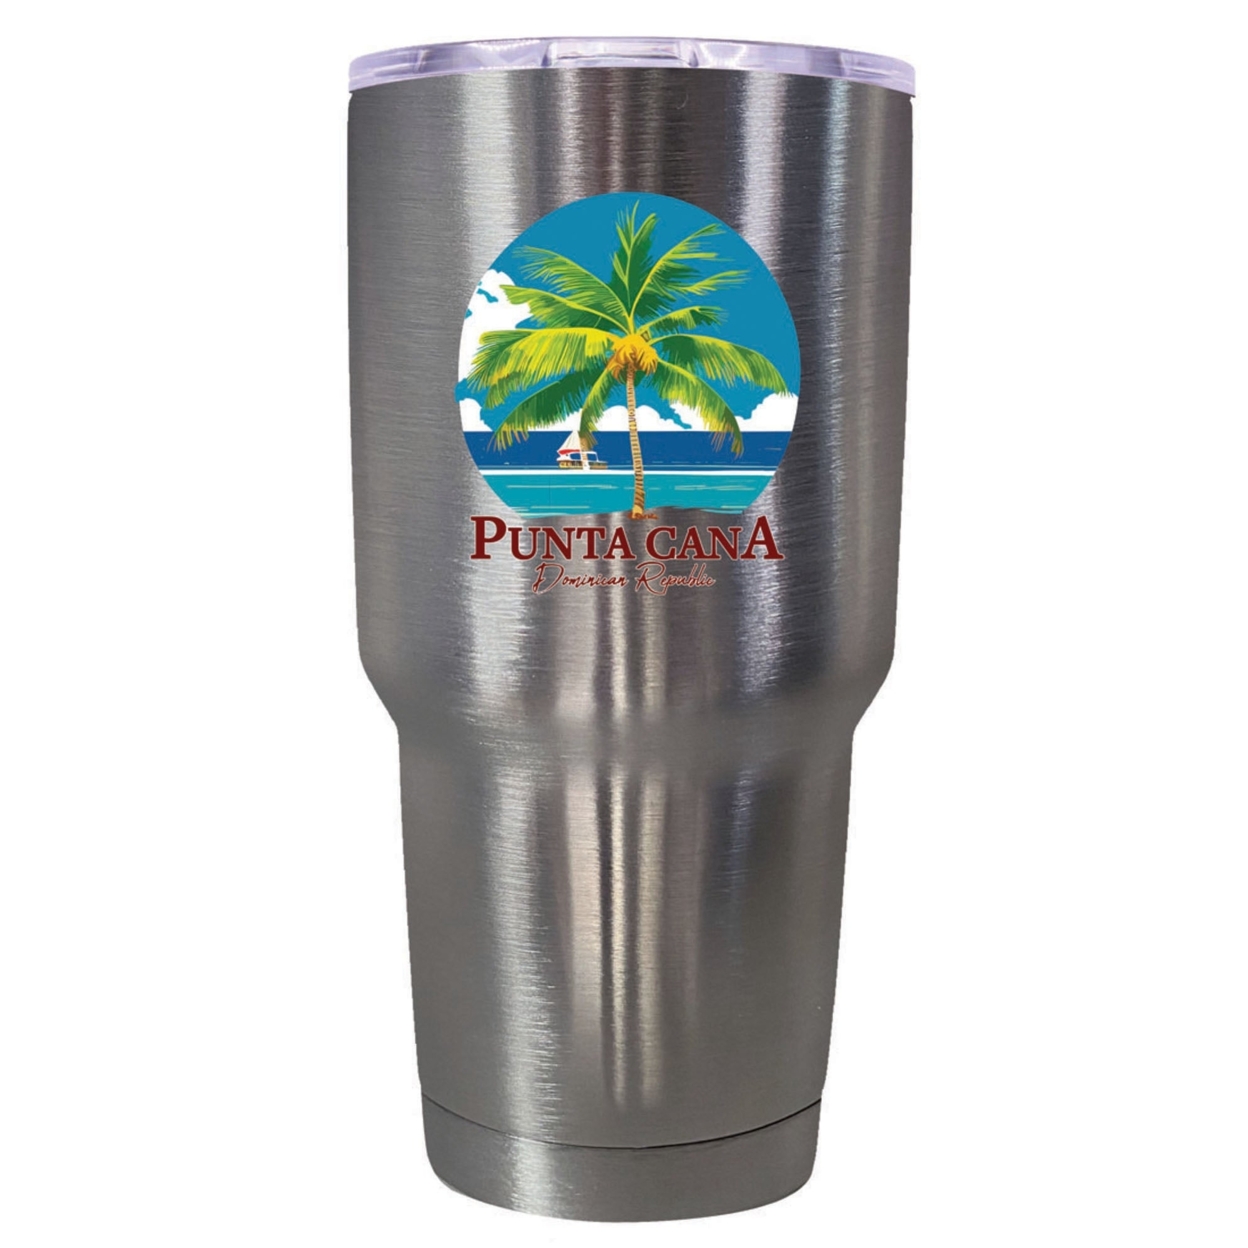 Punta Cana Dominican Republic Souvenir 24 Oz Insulated Stainless Steel Tumbler - White, PARROT